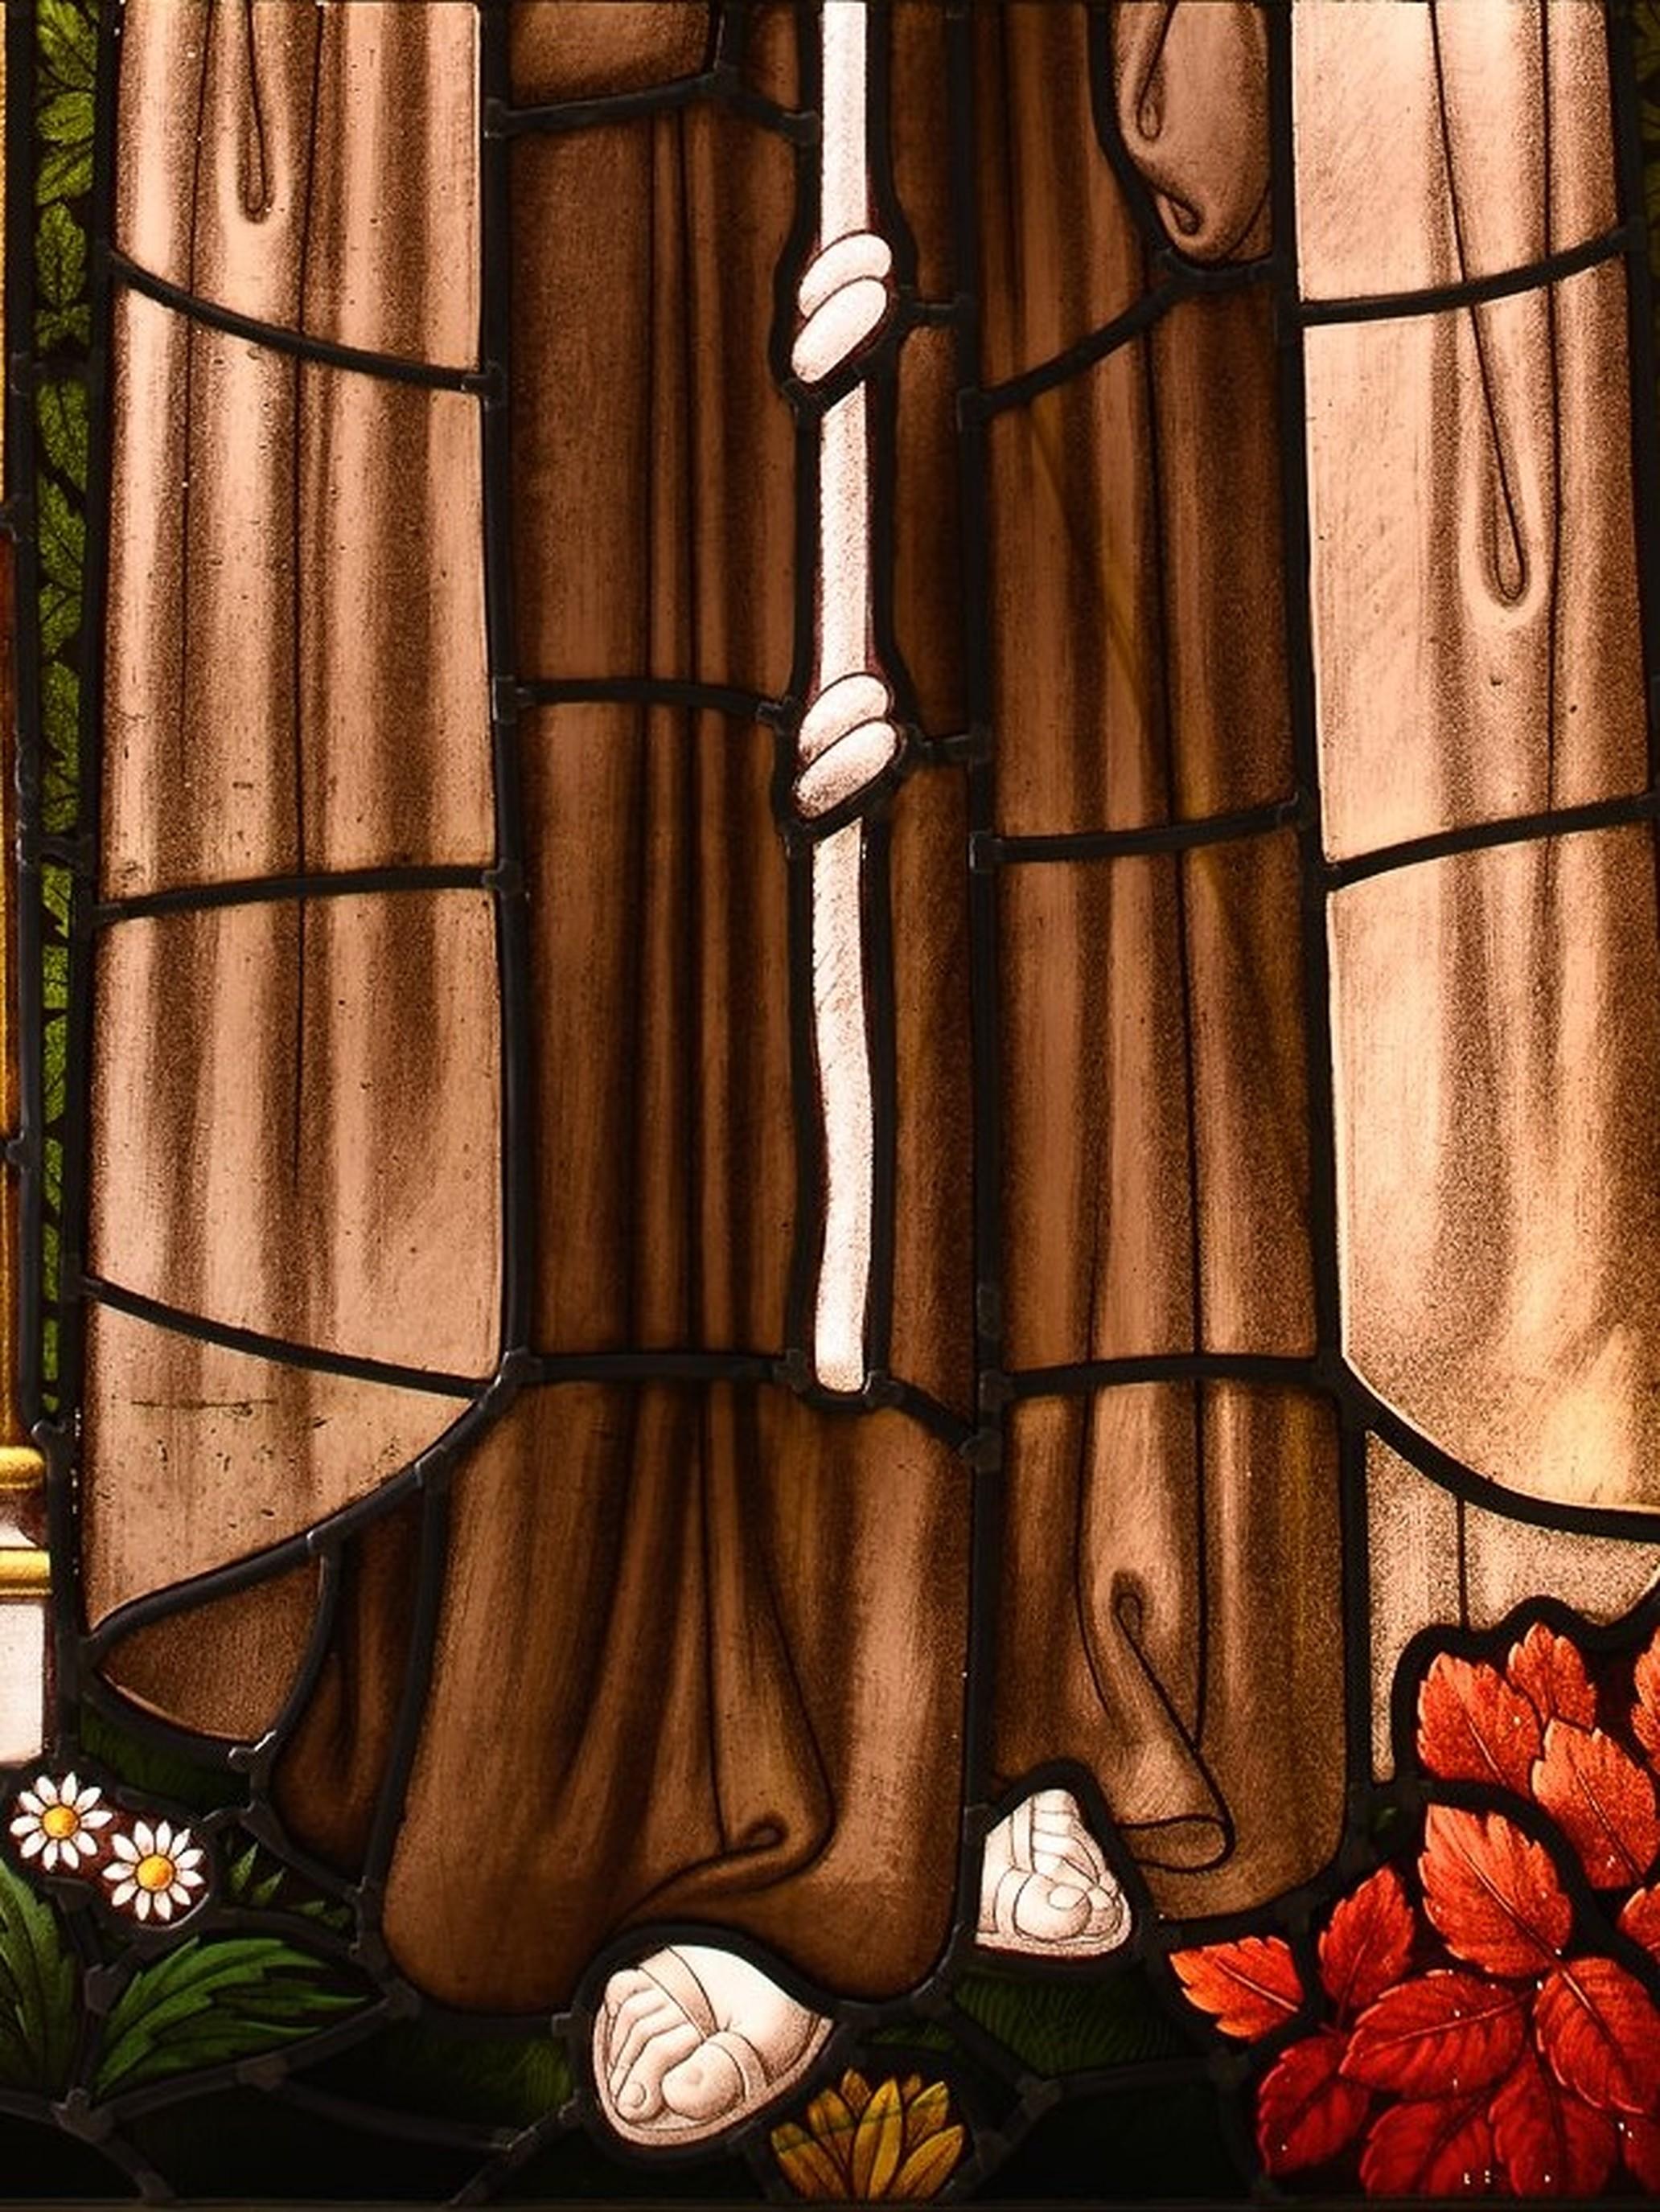 Saint Clare of Assisi (Assisi, 1194-Assisi, 1253) founded the Poor Clares and became an abbess in 1216. Clare and the sisters of her monastic order lived a life of austerity and seclusion from the world. When Assisi was attacked by the army of the